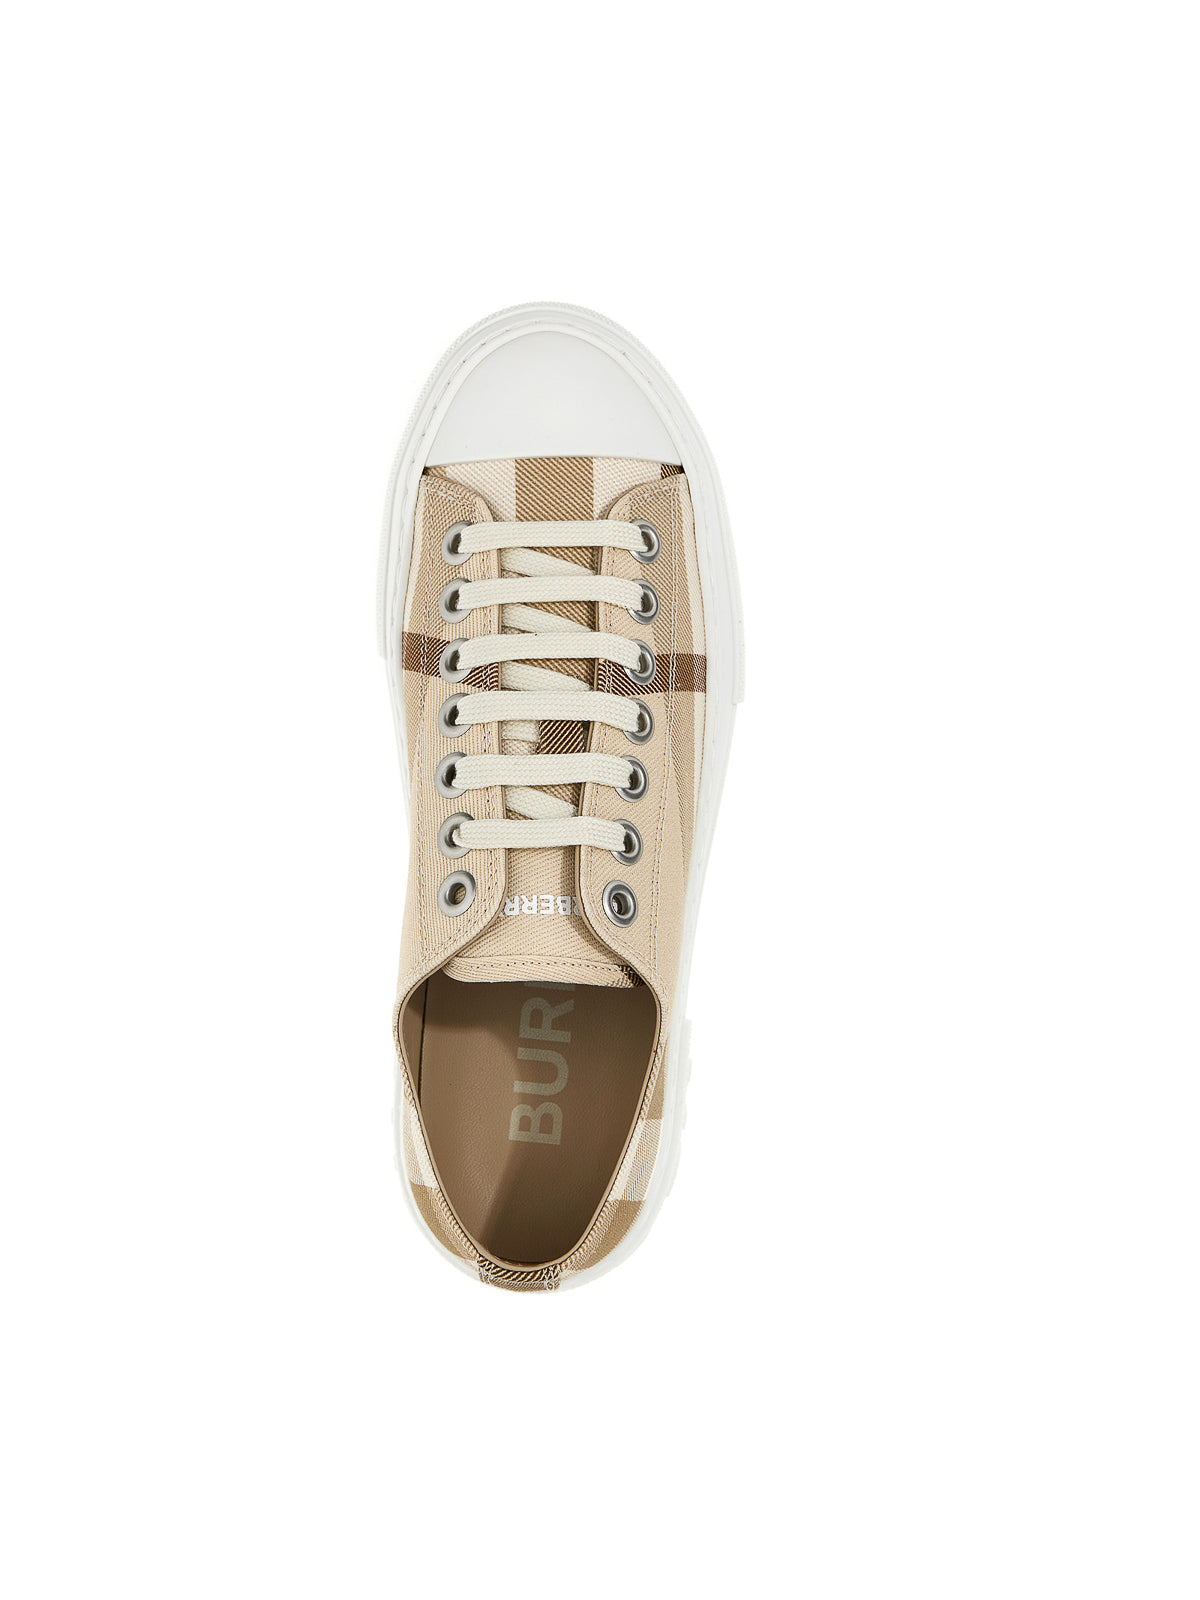 Burberry Beige Check-Print Sneakers